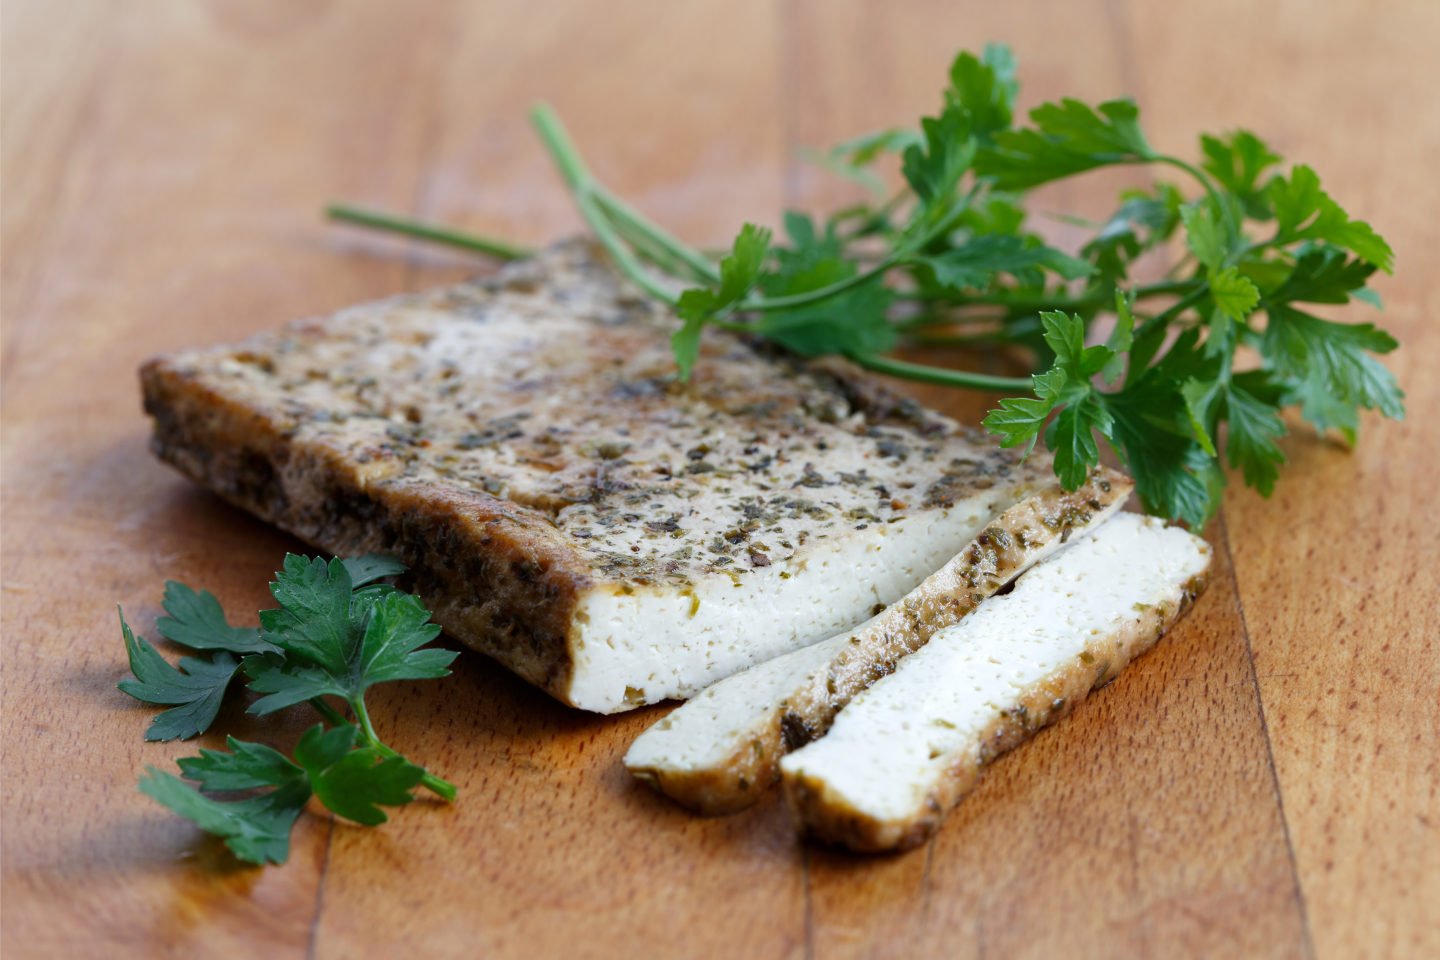 a slice of marinated tofu on wooden surface